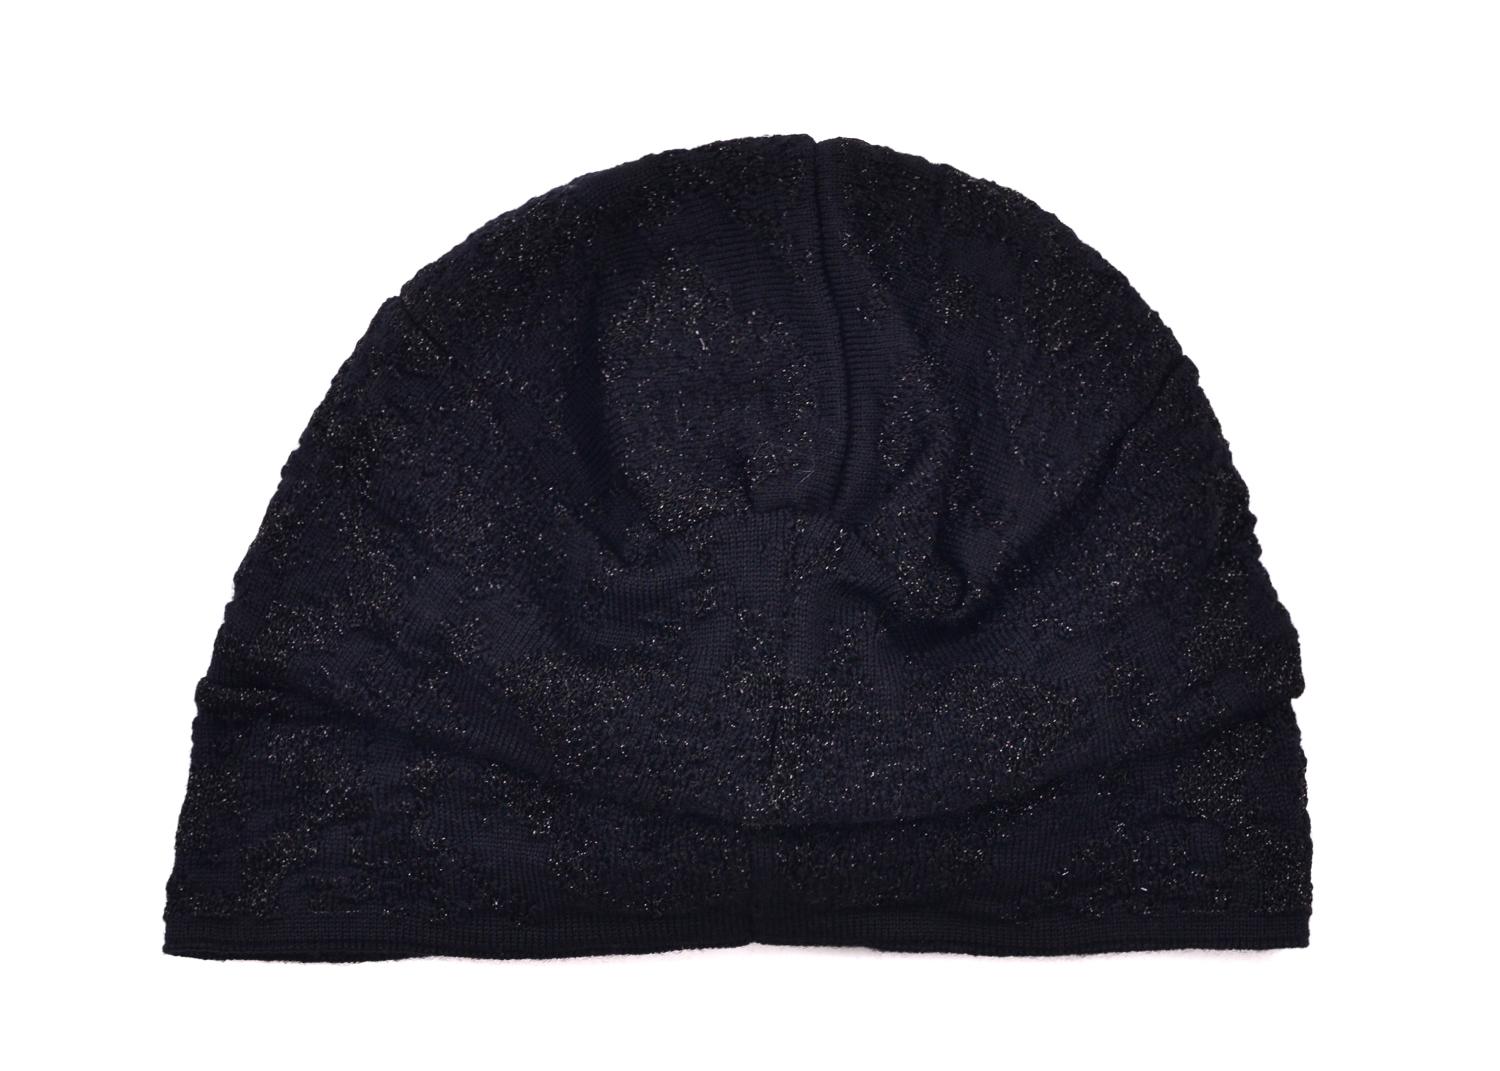 Wrap things up in style with the finishing touch of your Roberto Cavalli Turban. This highly sought out accessory features black lurex infused wool, a luxe ruched style turban, and snug ribbed trim. You can pair this dazzling essential with a black